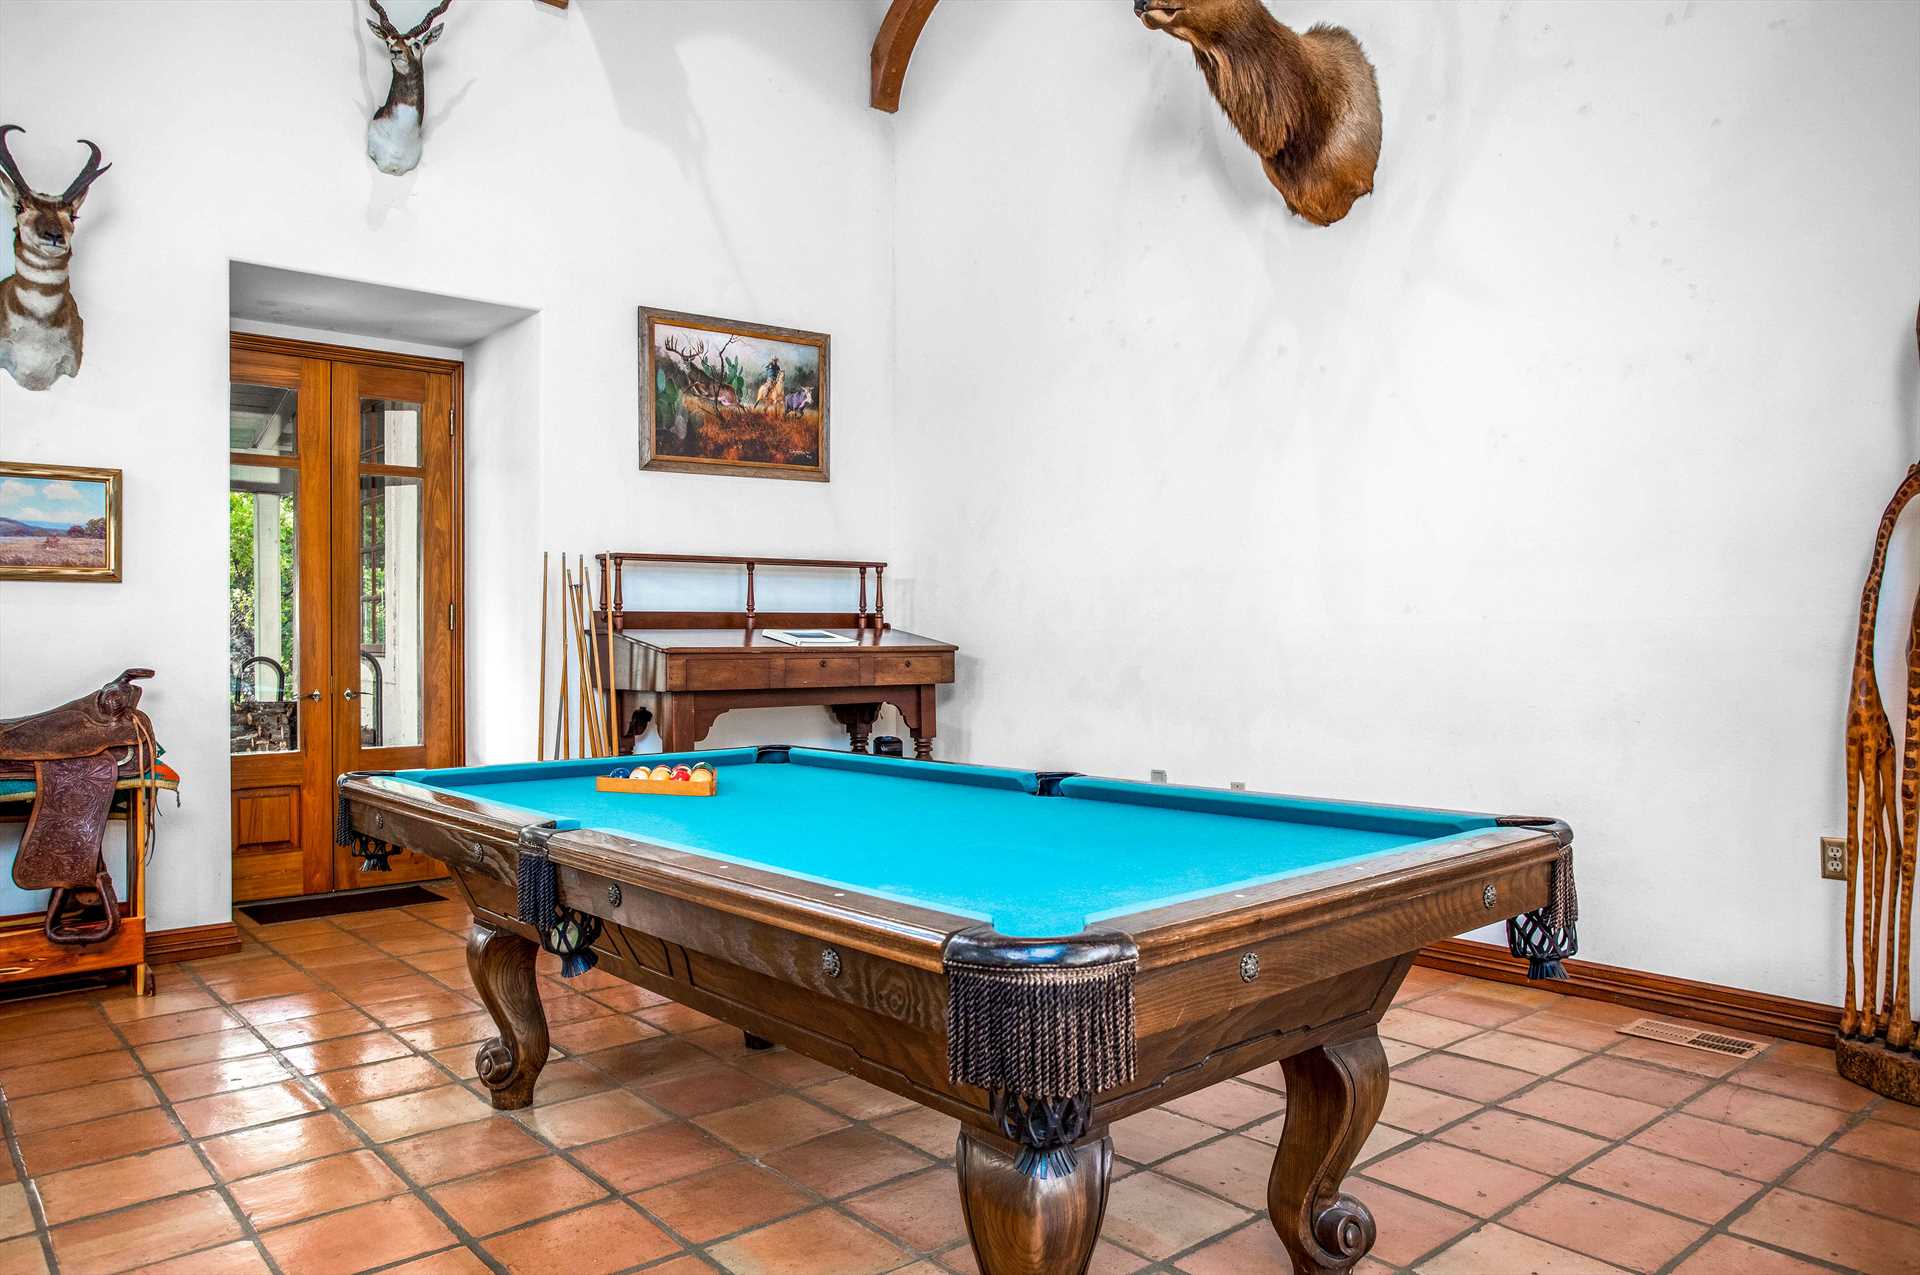                                                 Fishing isn't the only angling going on at the Retreat! Test your billiard angles on the vintage drop-pocket pool table.